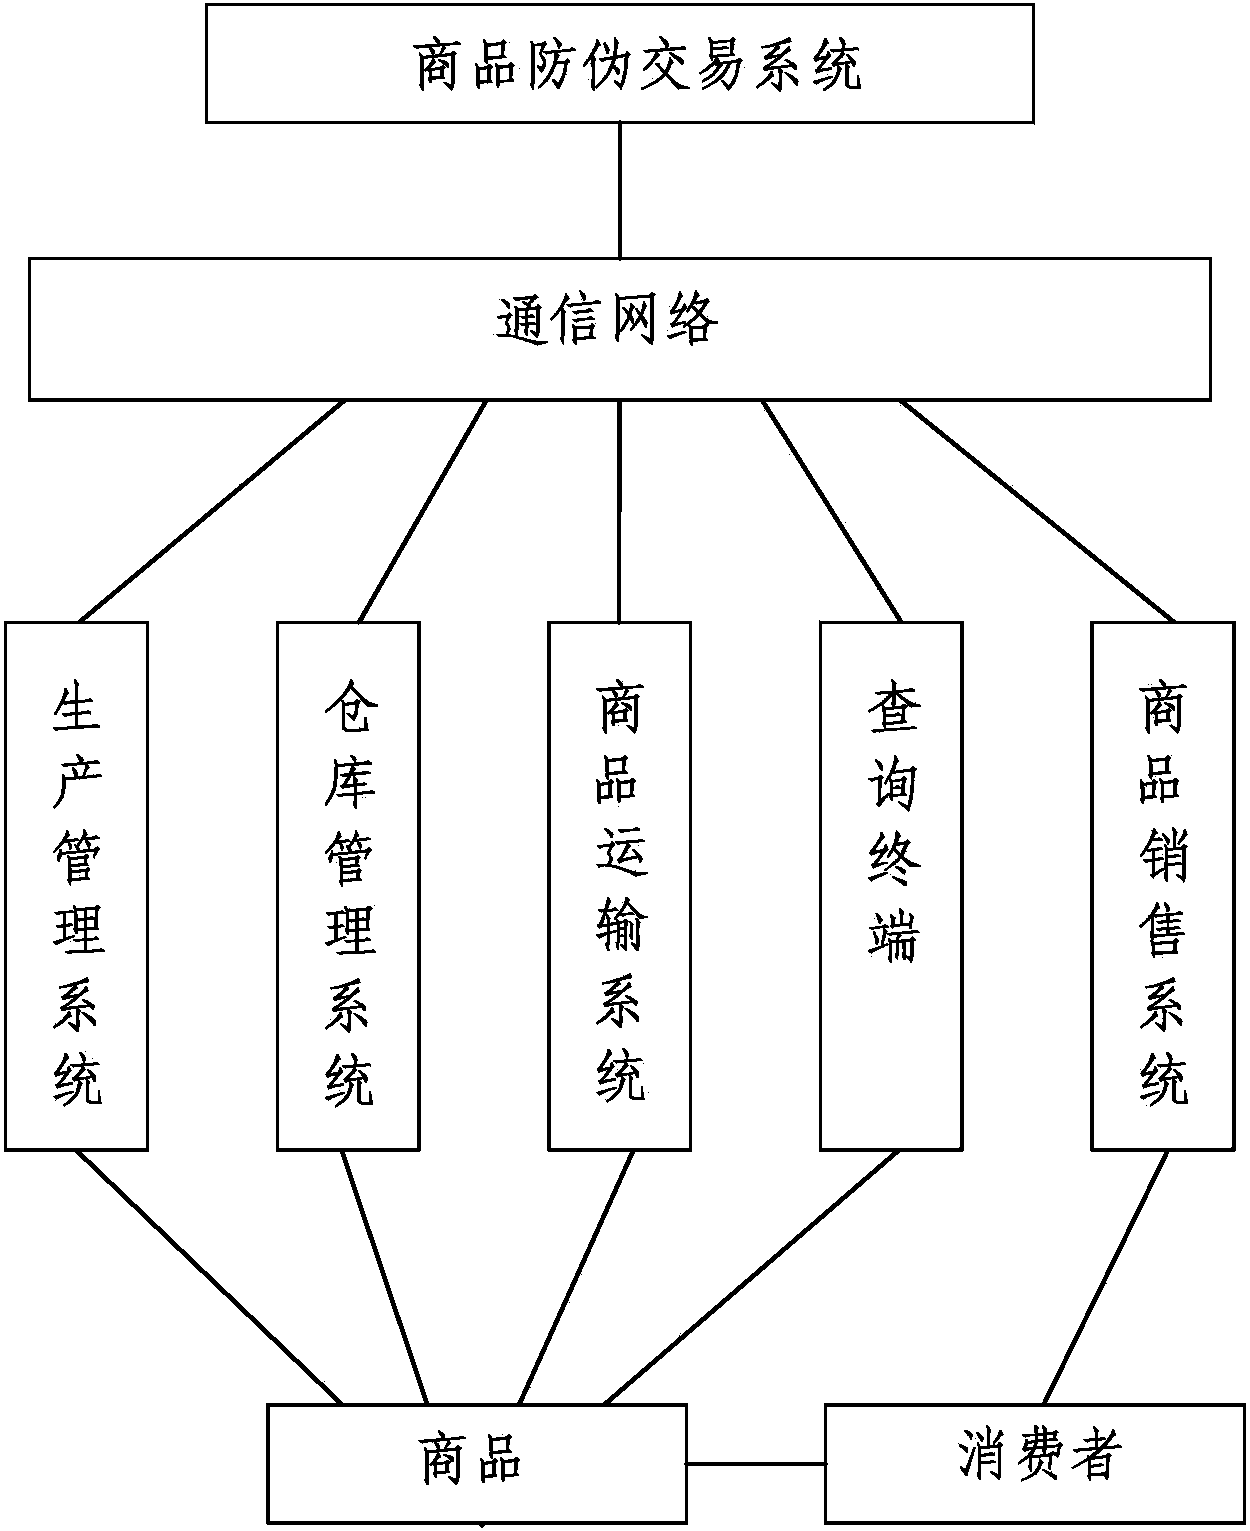 Anti-counterfeiting off-site commodity transaction method and system